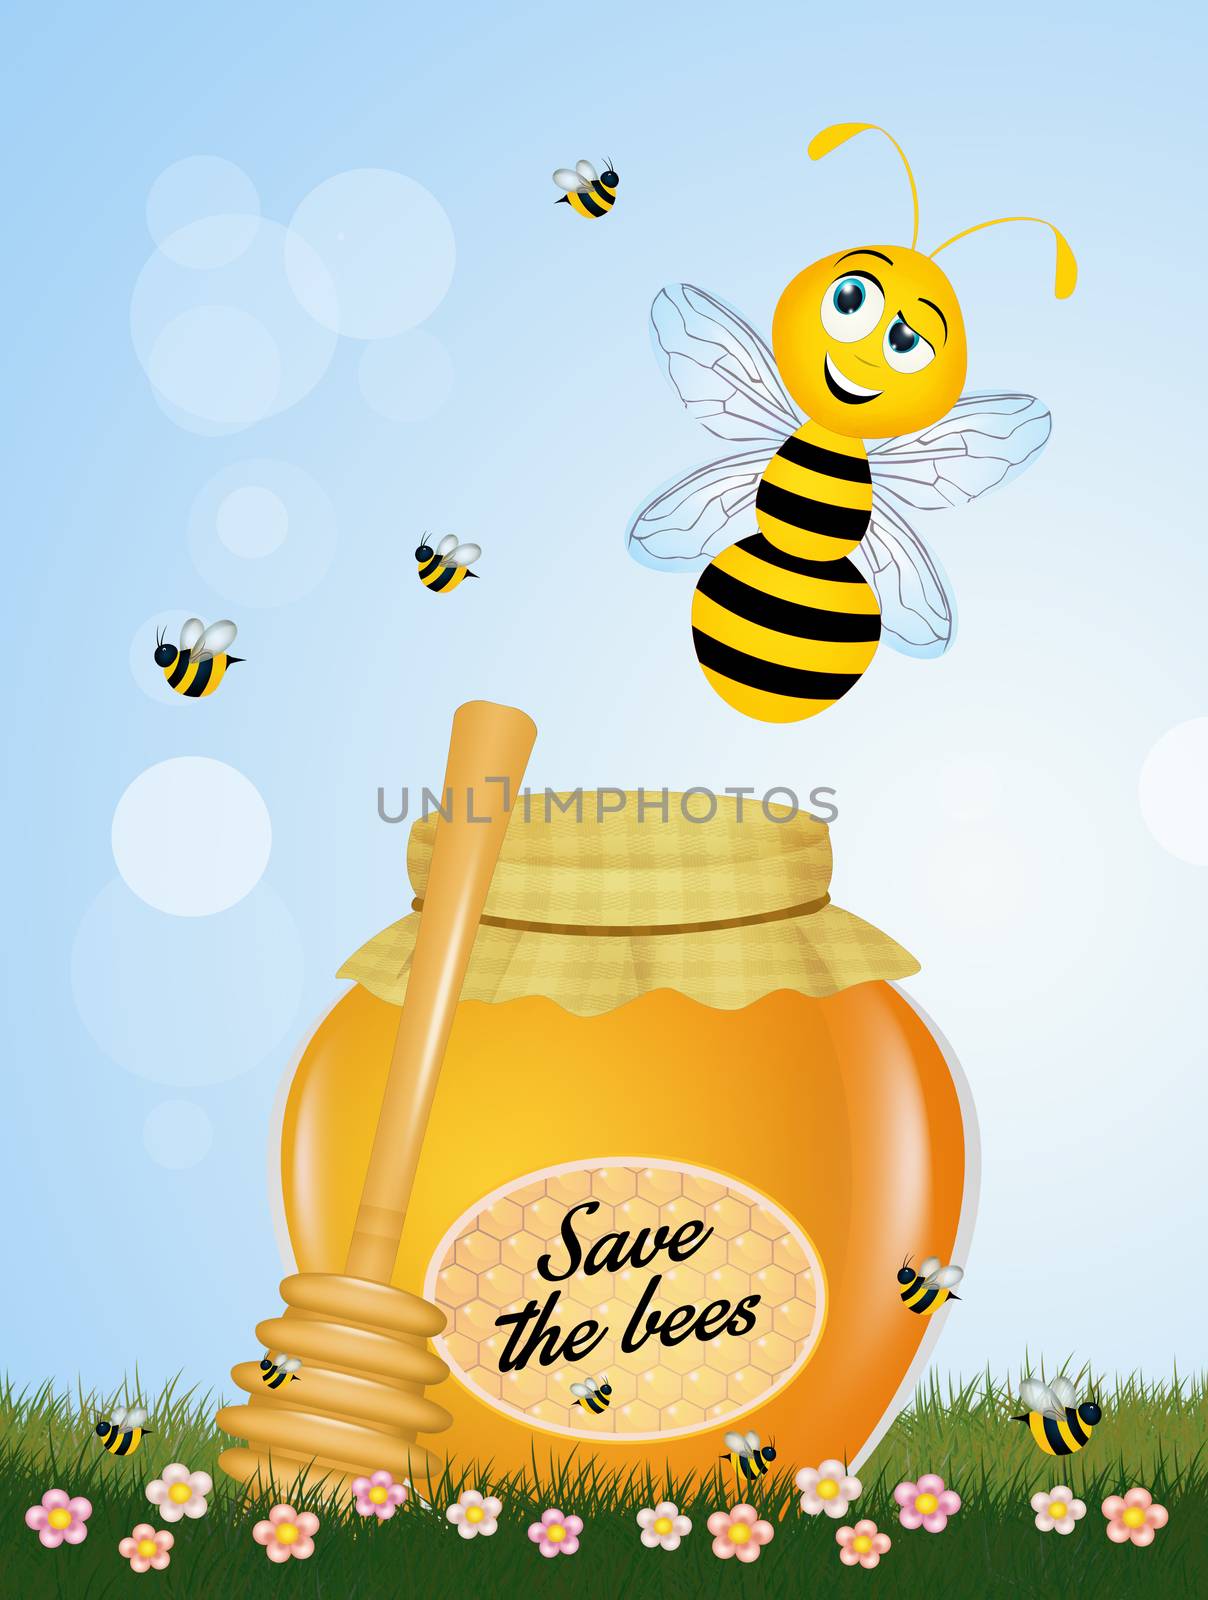 illustration of the importance of saving bees